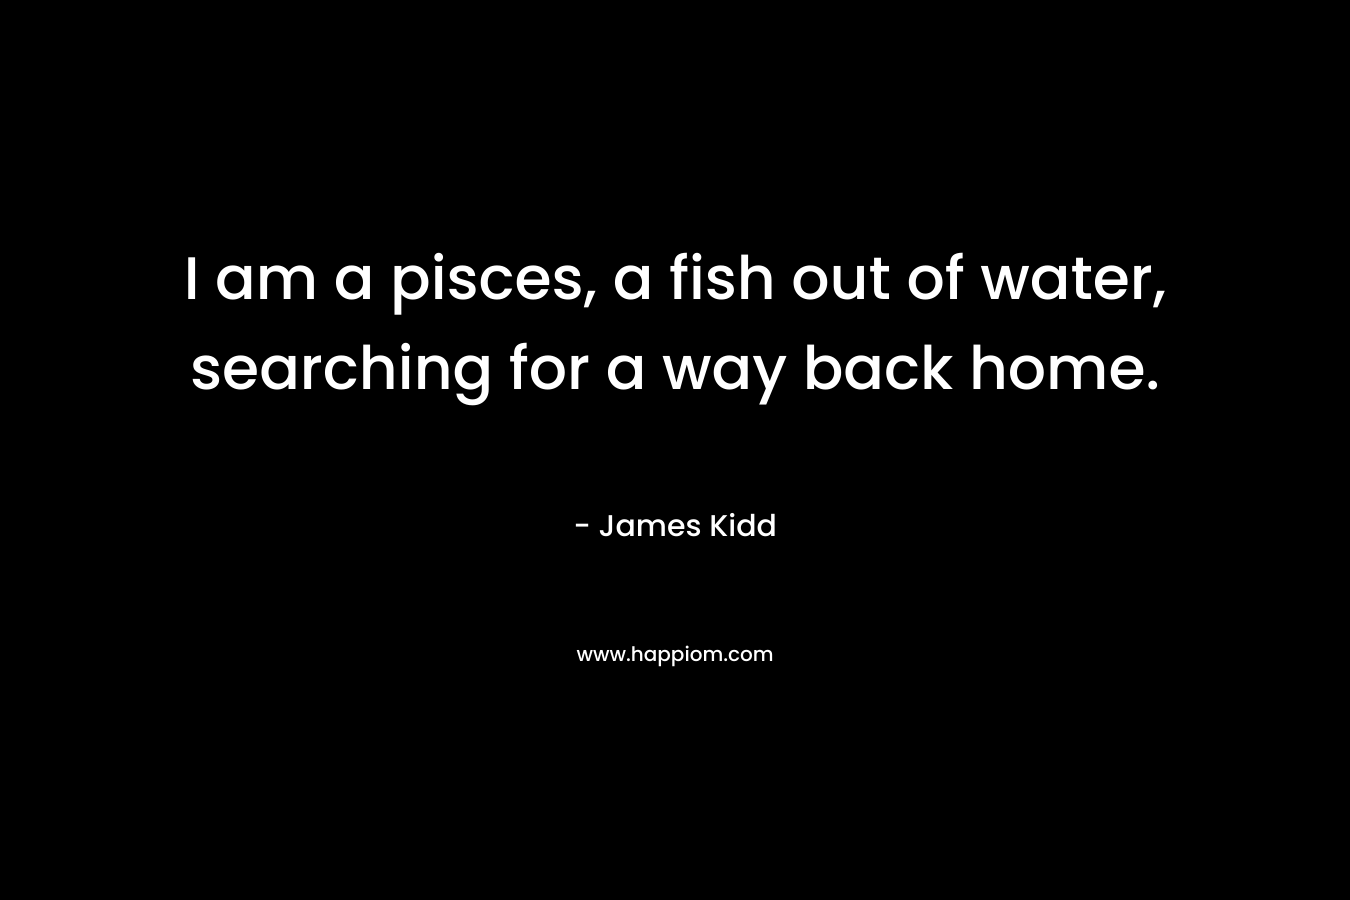 I am a pisces, a fish out of water, searching for a way back home.